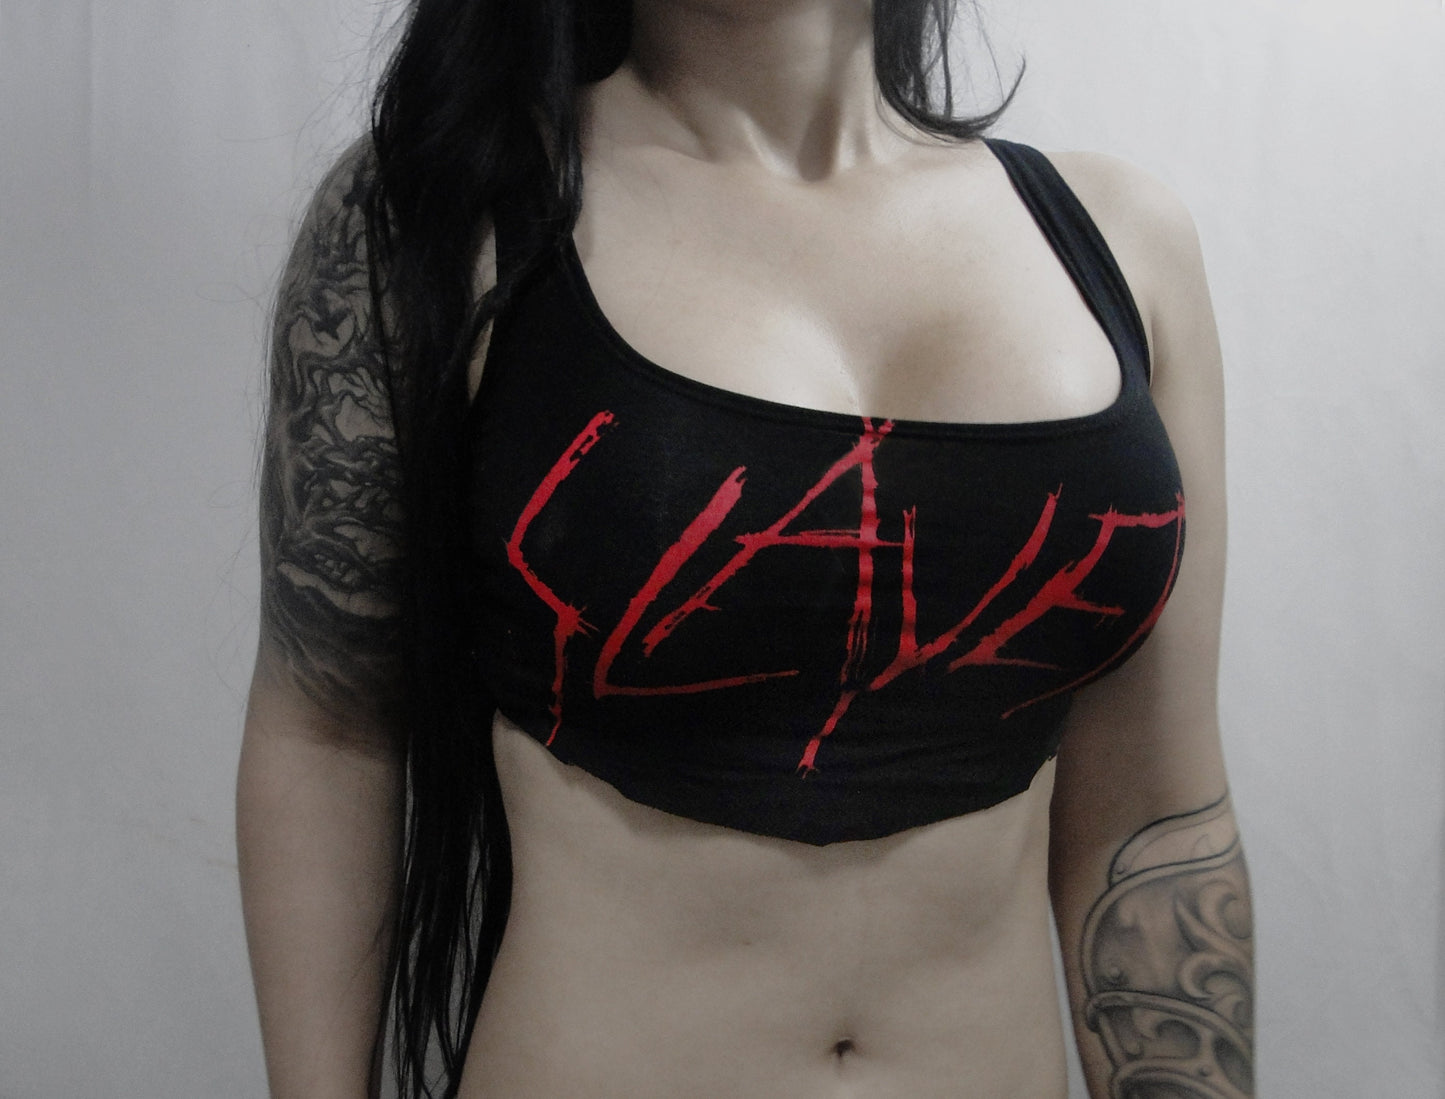 SLAYER BLOODY top cropped ⇹ shredded shirt top ⇹ Slayer crop